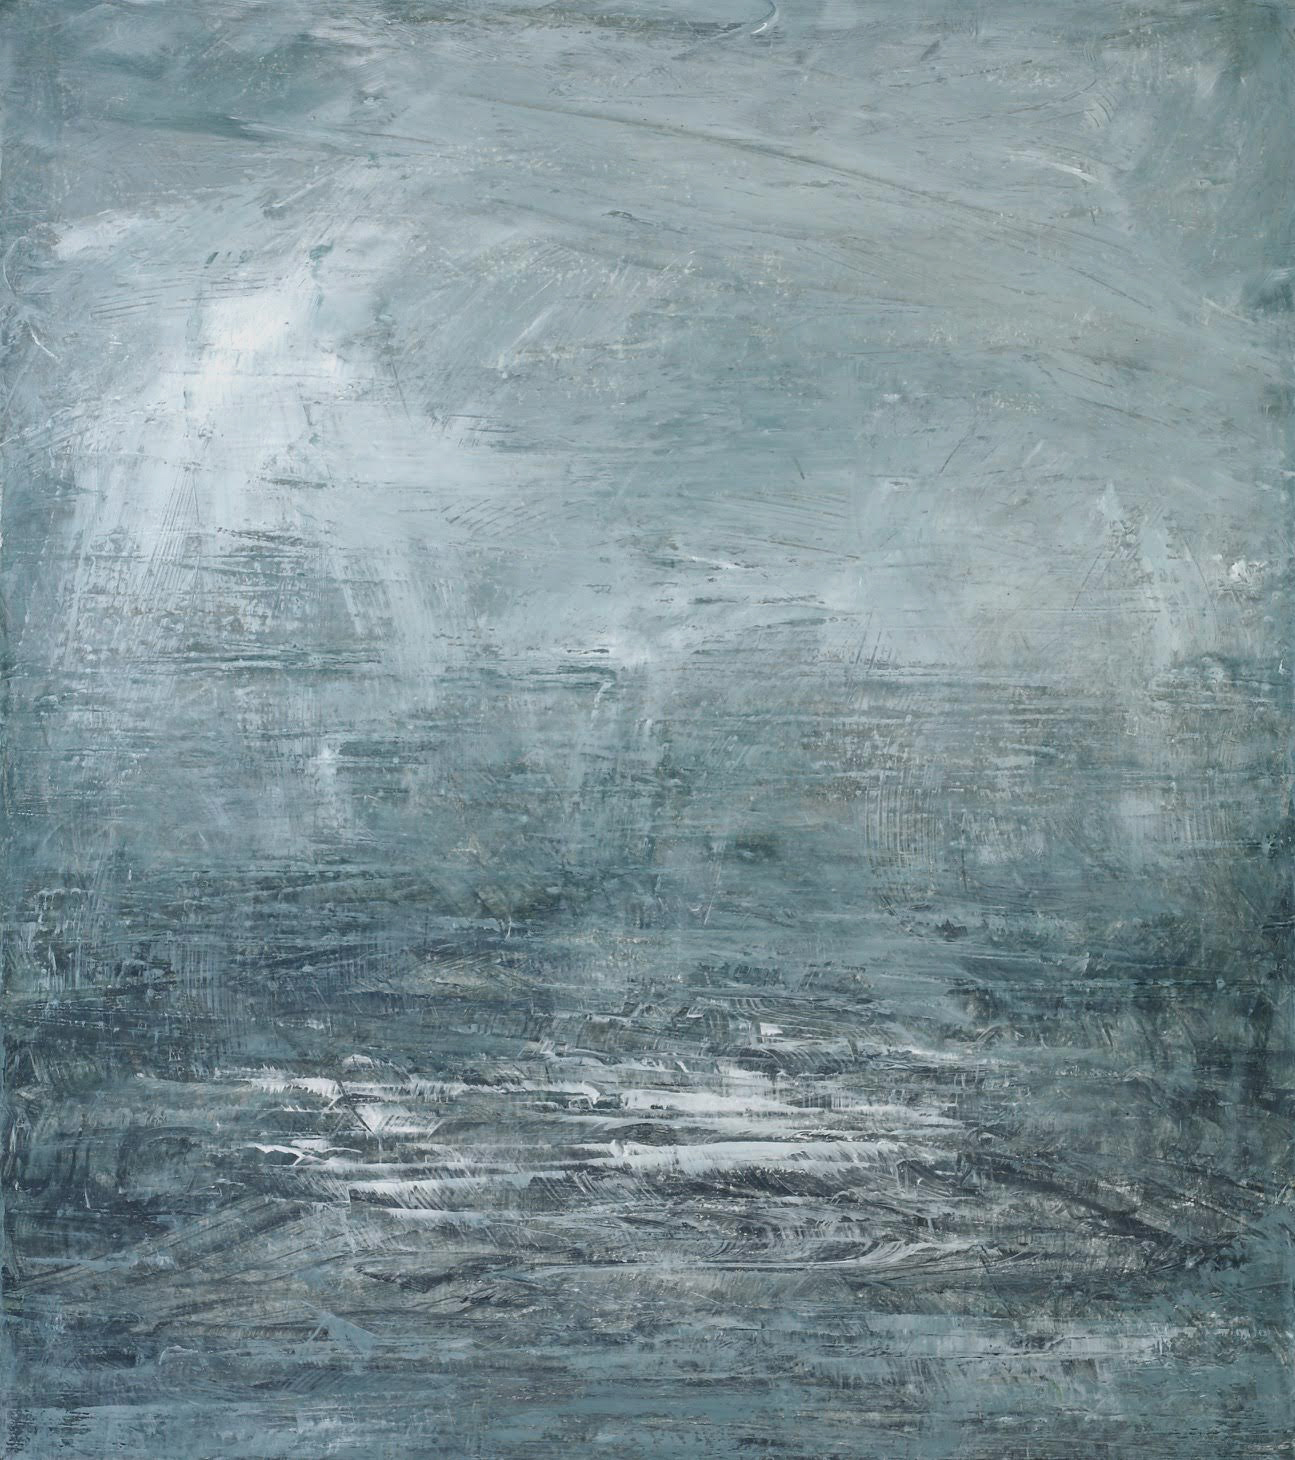 03_christel_dillbohner-lost_coast_xiii_-_weather_rolling_in_2014_60in_x_53in_oil_cold_wax_on_linen